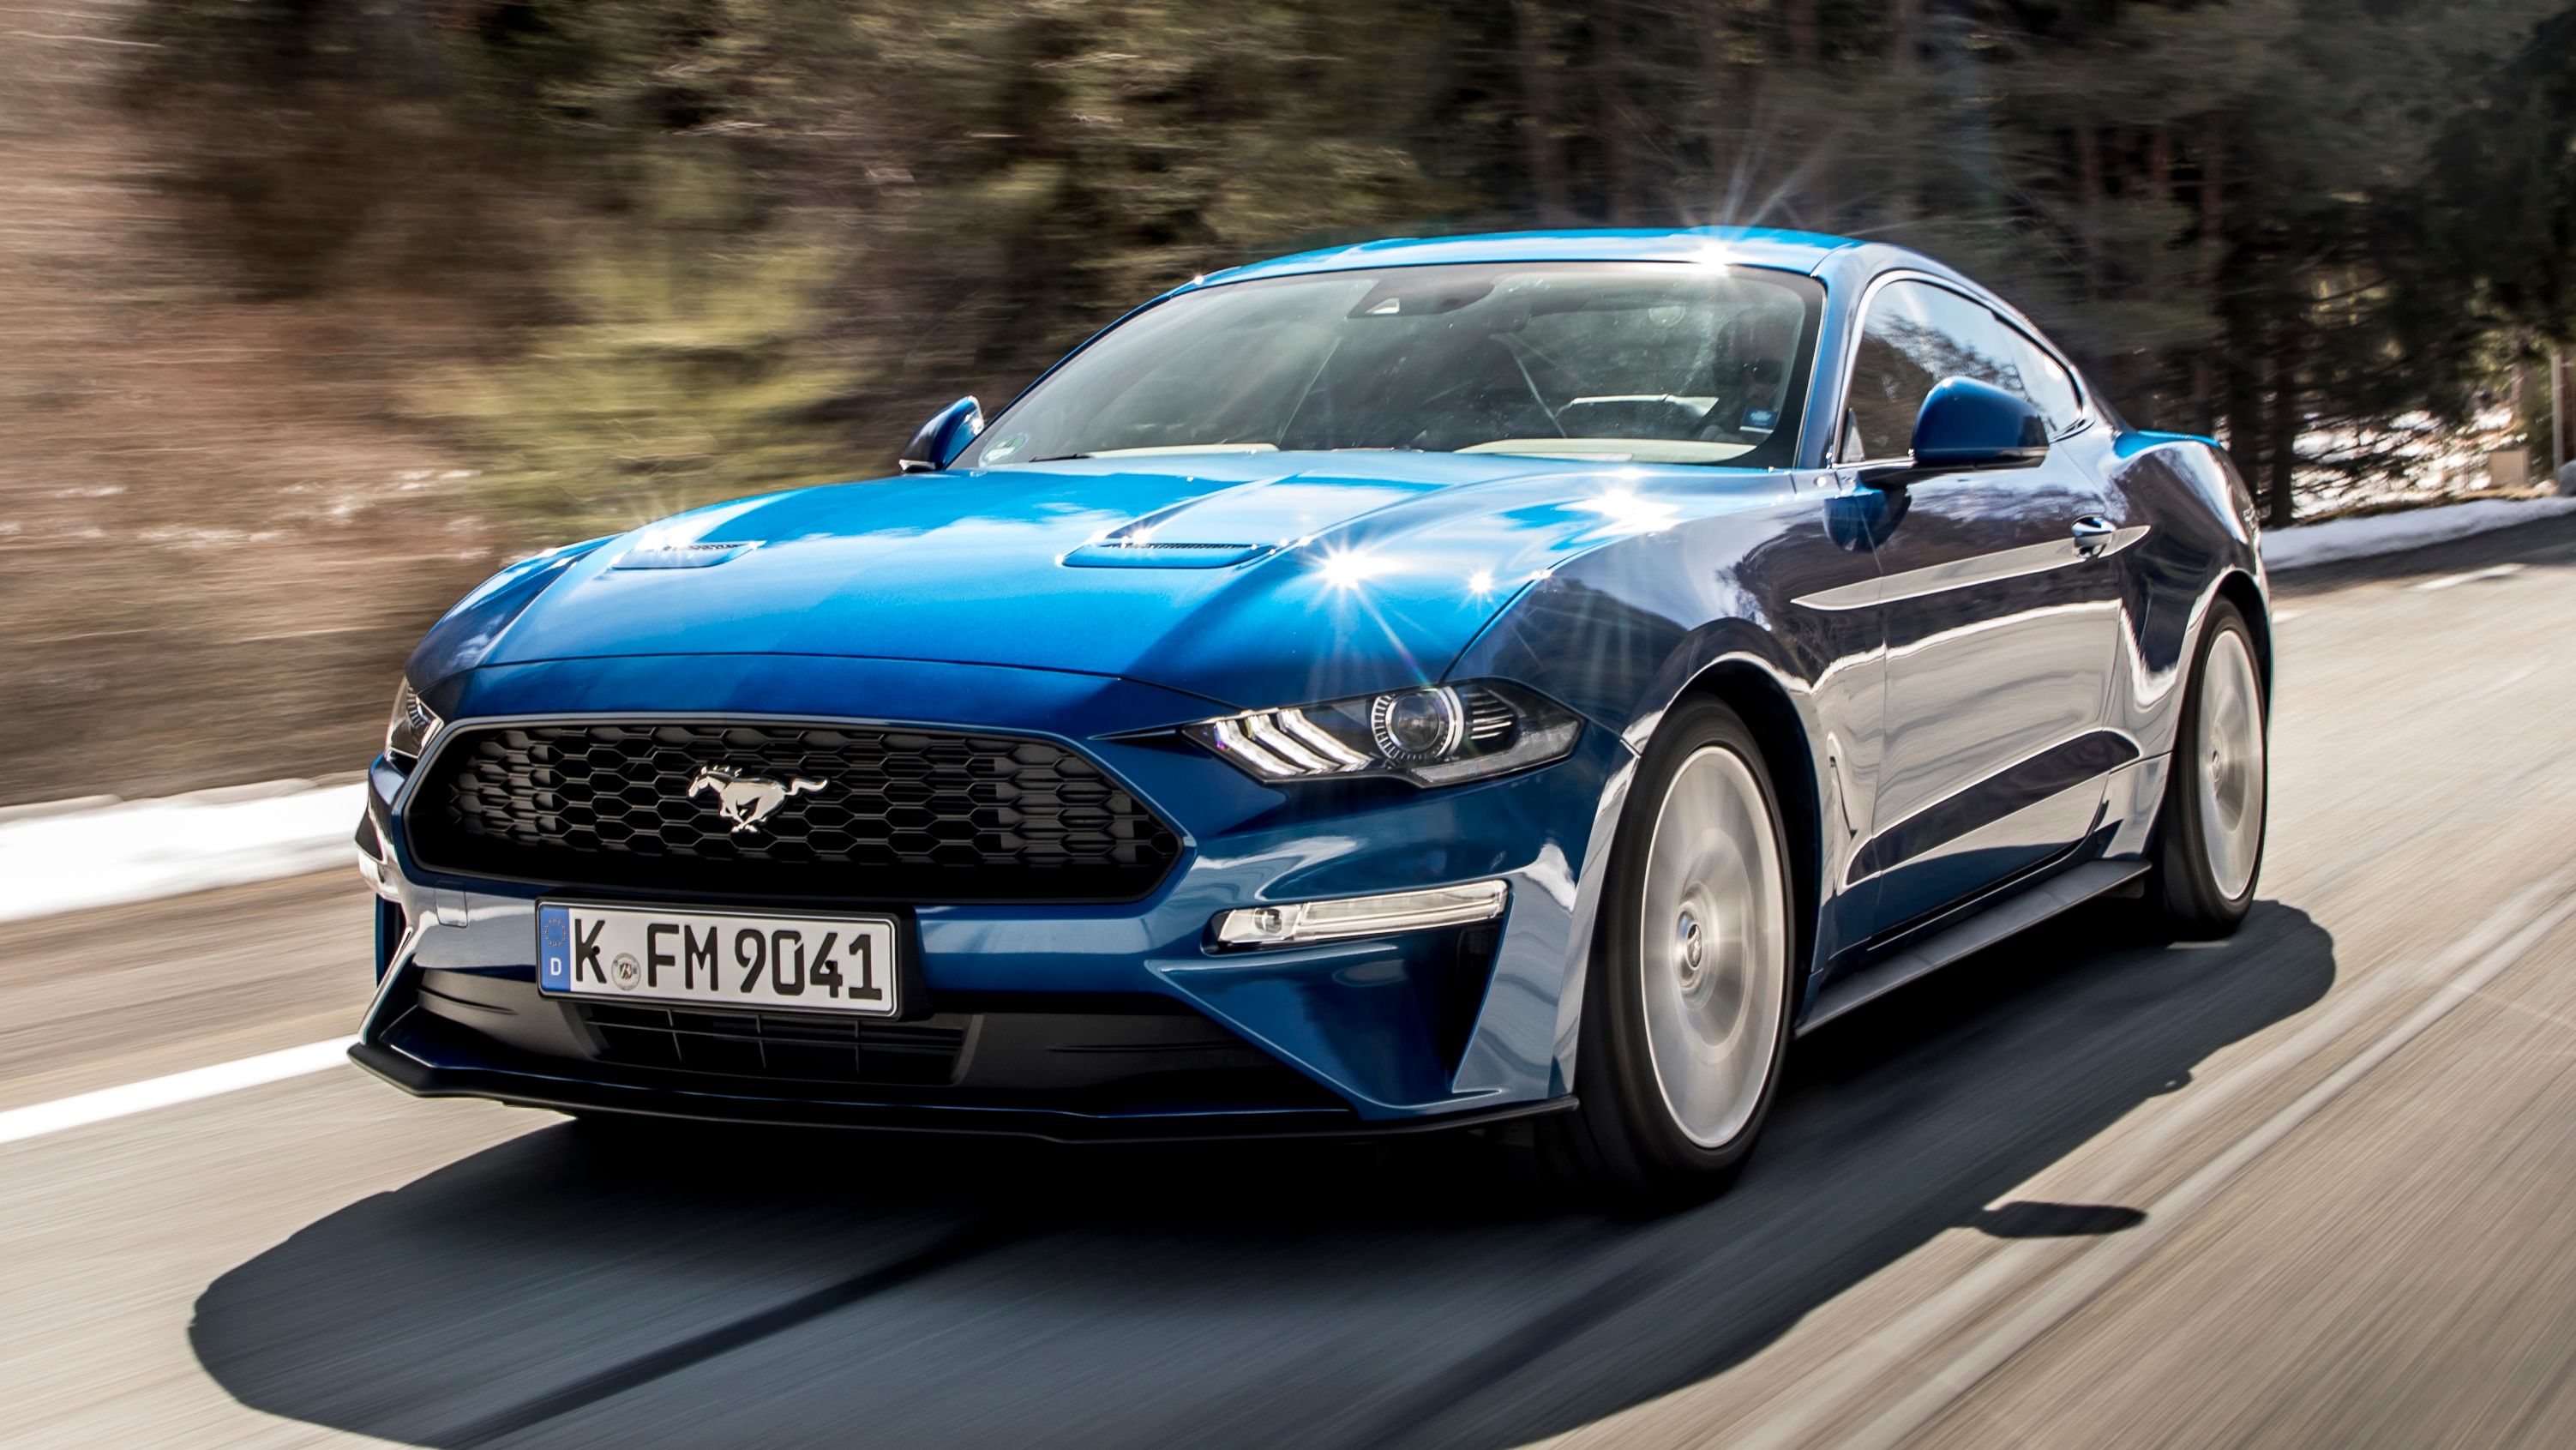 This Is Why Ford Mustangs Retain Their Value So Well Over Time